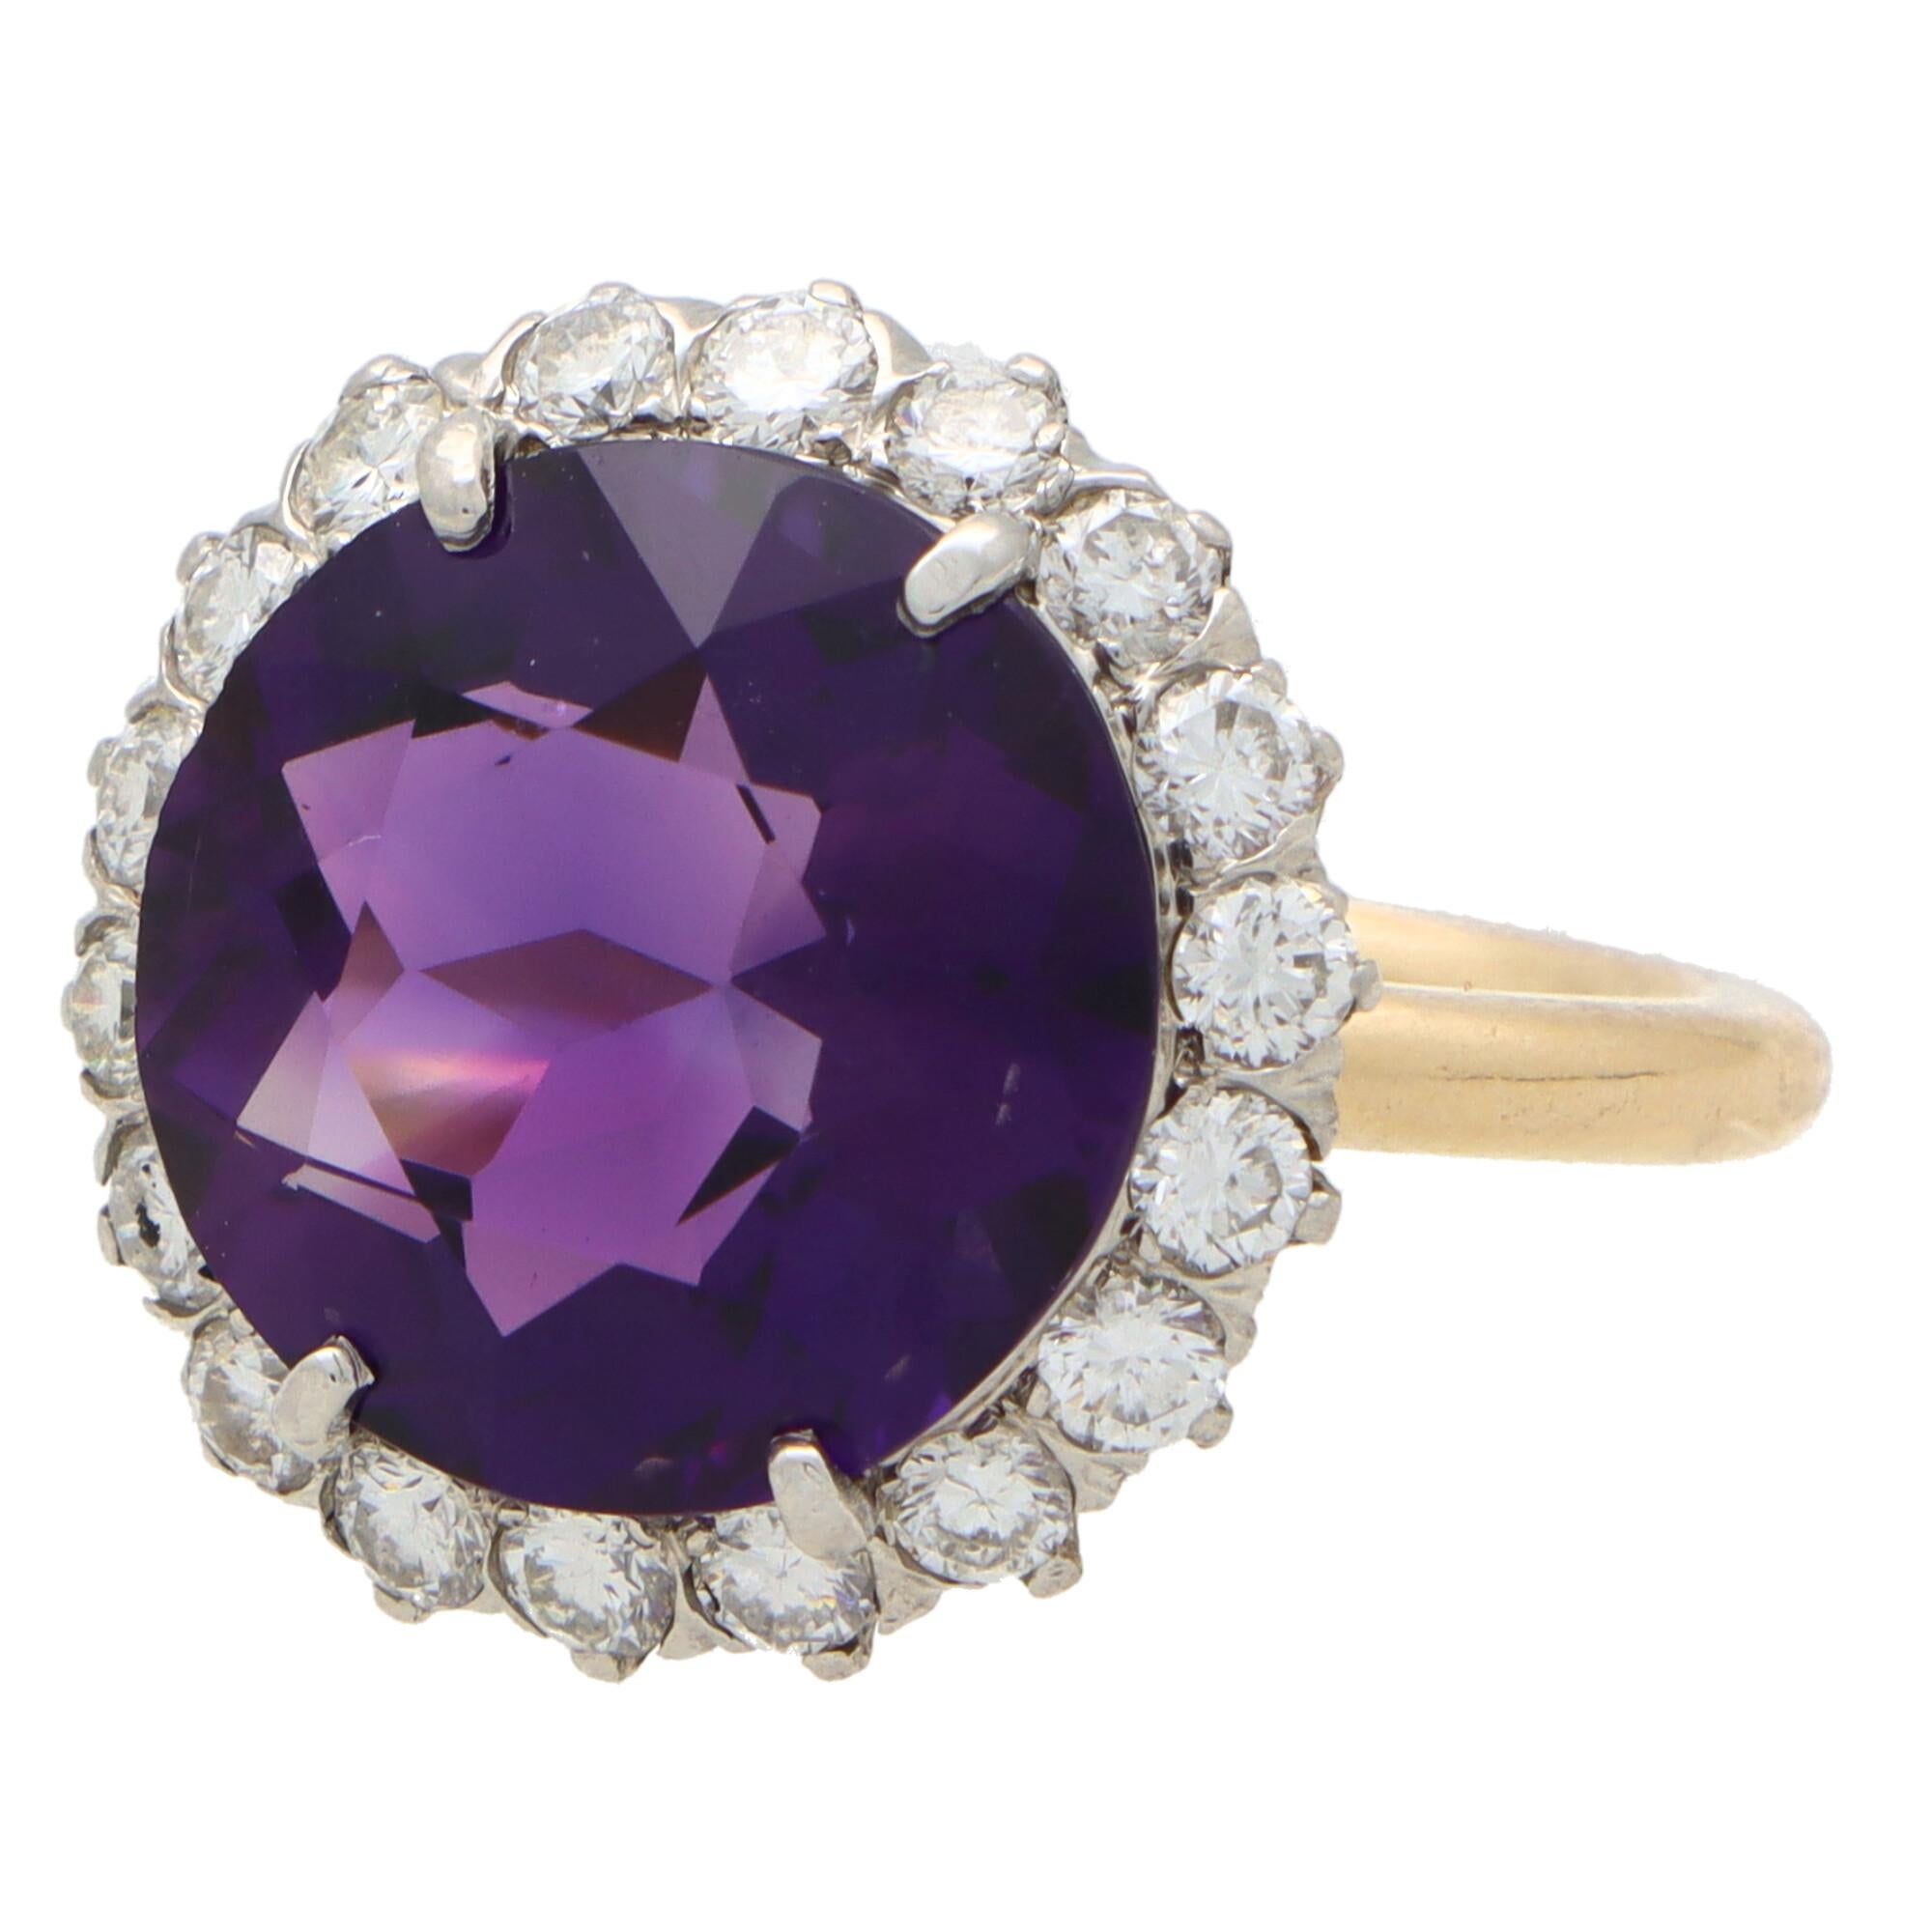 Retro Vintage Tiffany & Co. Amethyst and Diamond Cluster Ring Set in 14K Gold